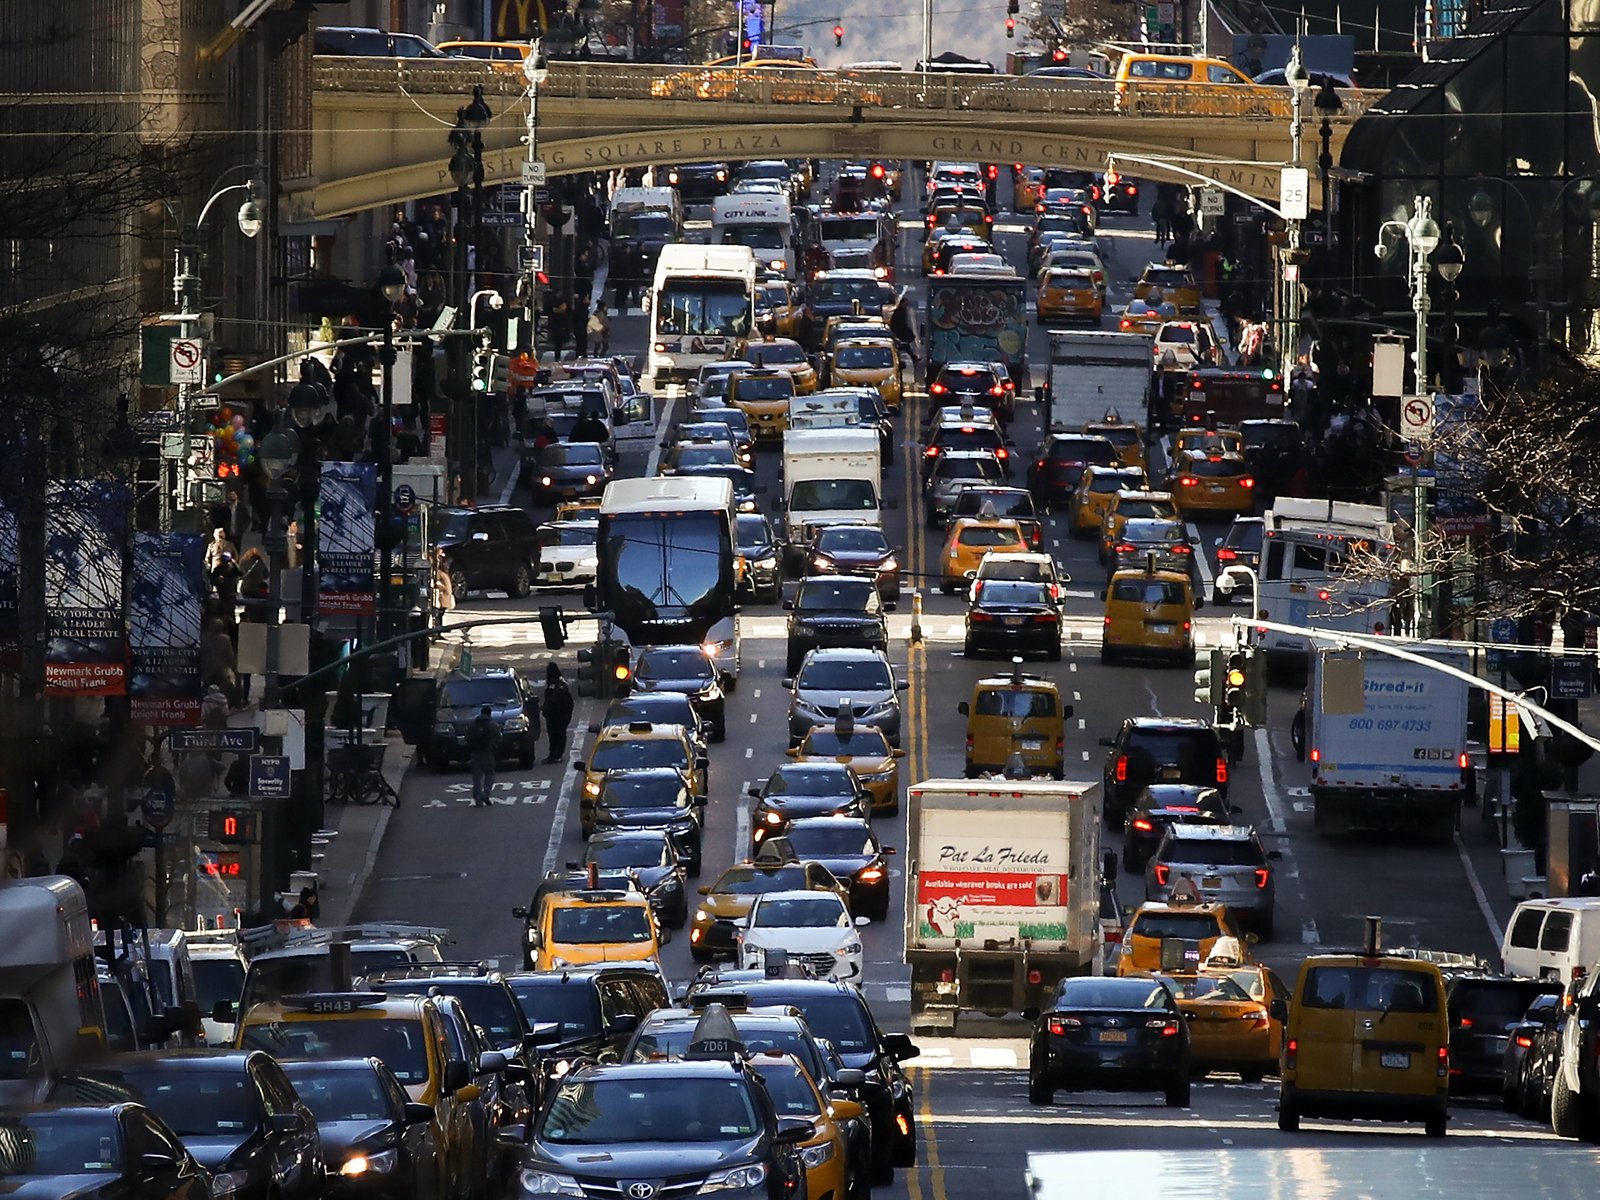 After gaining approval from state lawmakers, New York will become the first U.S. city to levy fees on motorists who drive on some of its most congested streets. Here, traffic fills 42nd Street in Midtown Manhattan in January 2018.